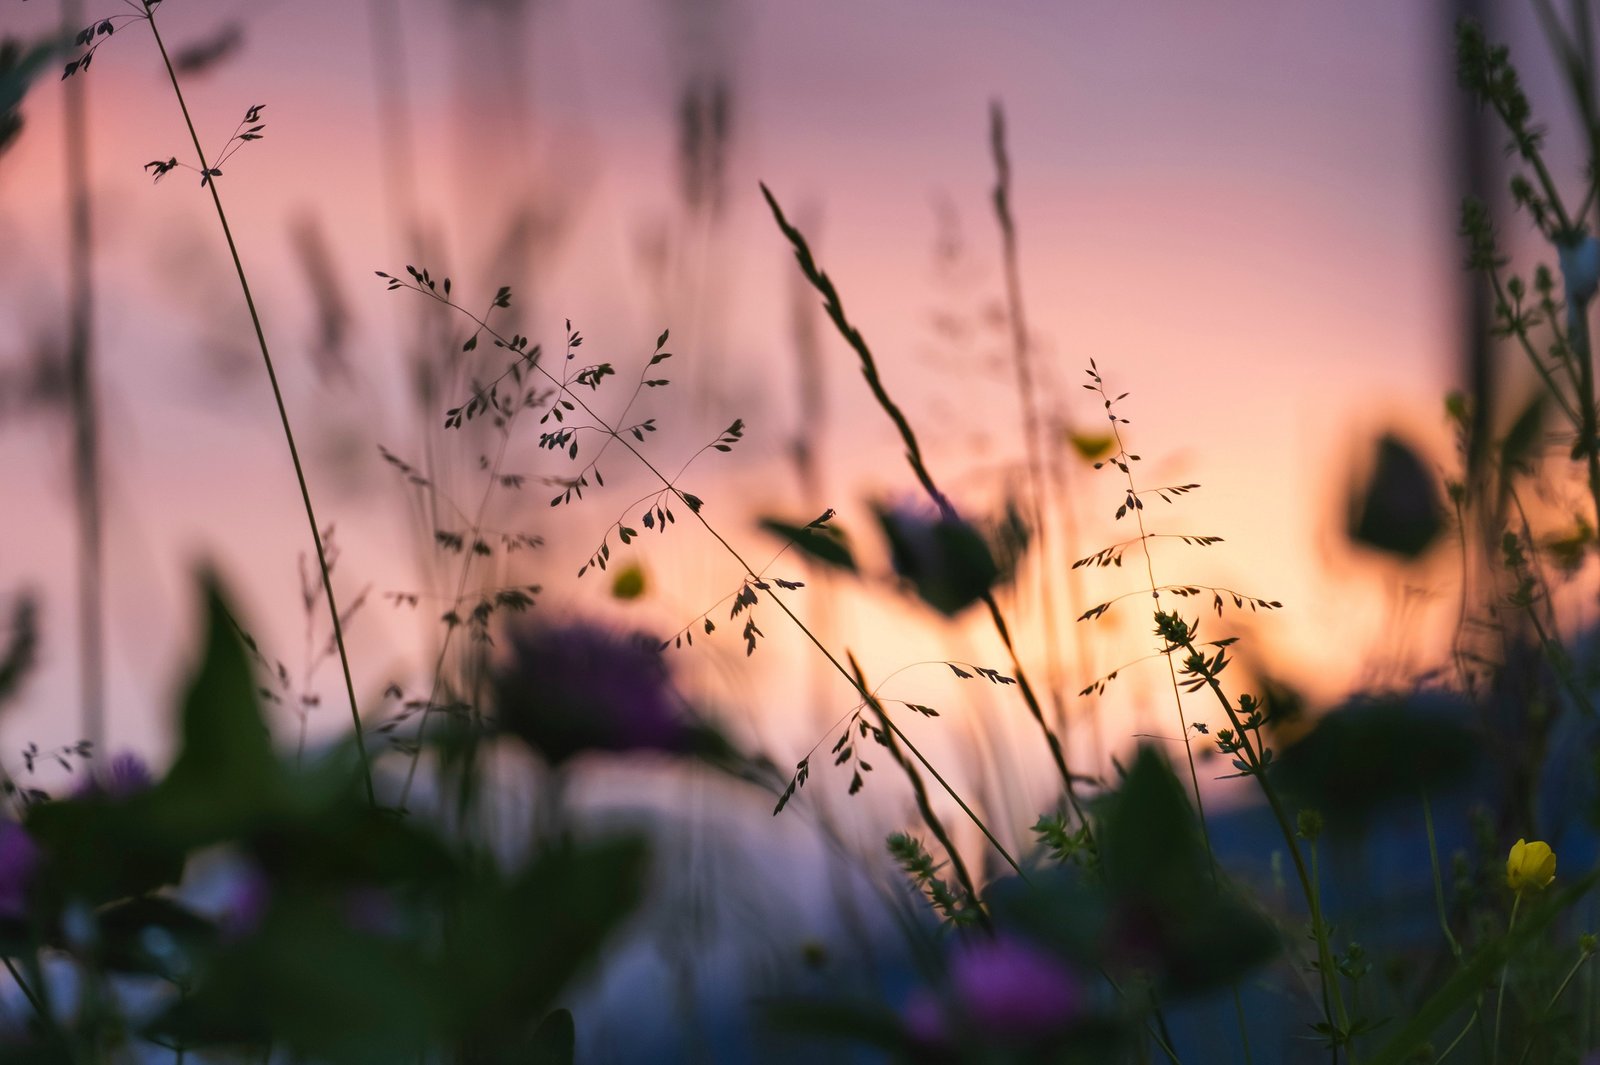 Image shows a close-up of different wild flowers at sunset.